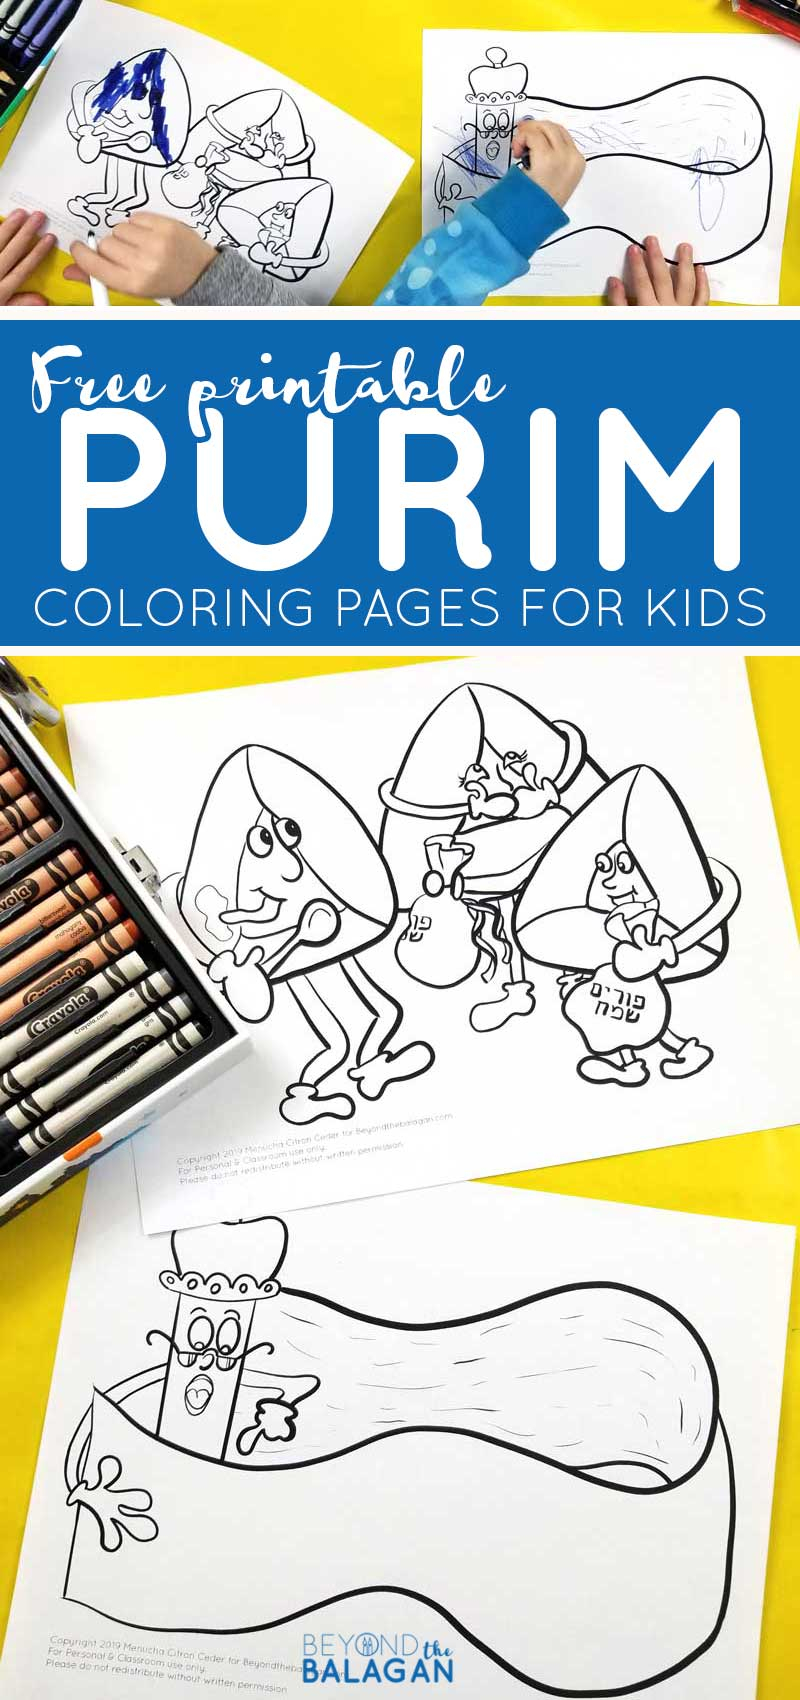 Purim Coloring Page Purim Coloring Pages For Kids Free Jewish Holiday Printables